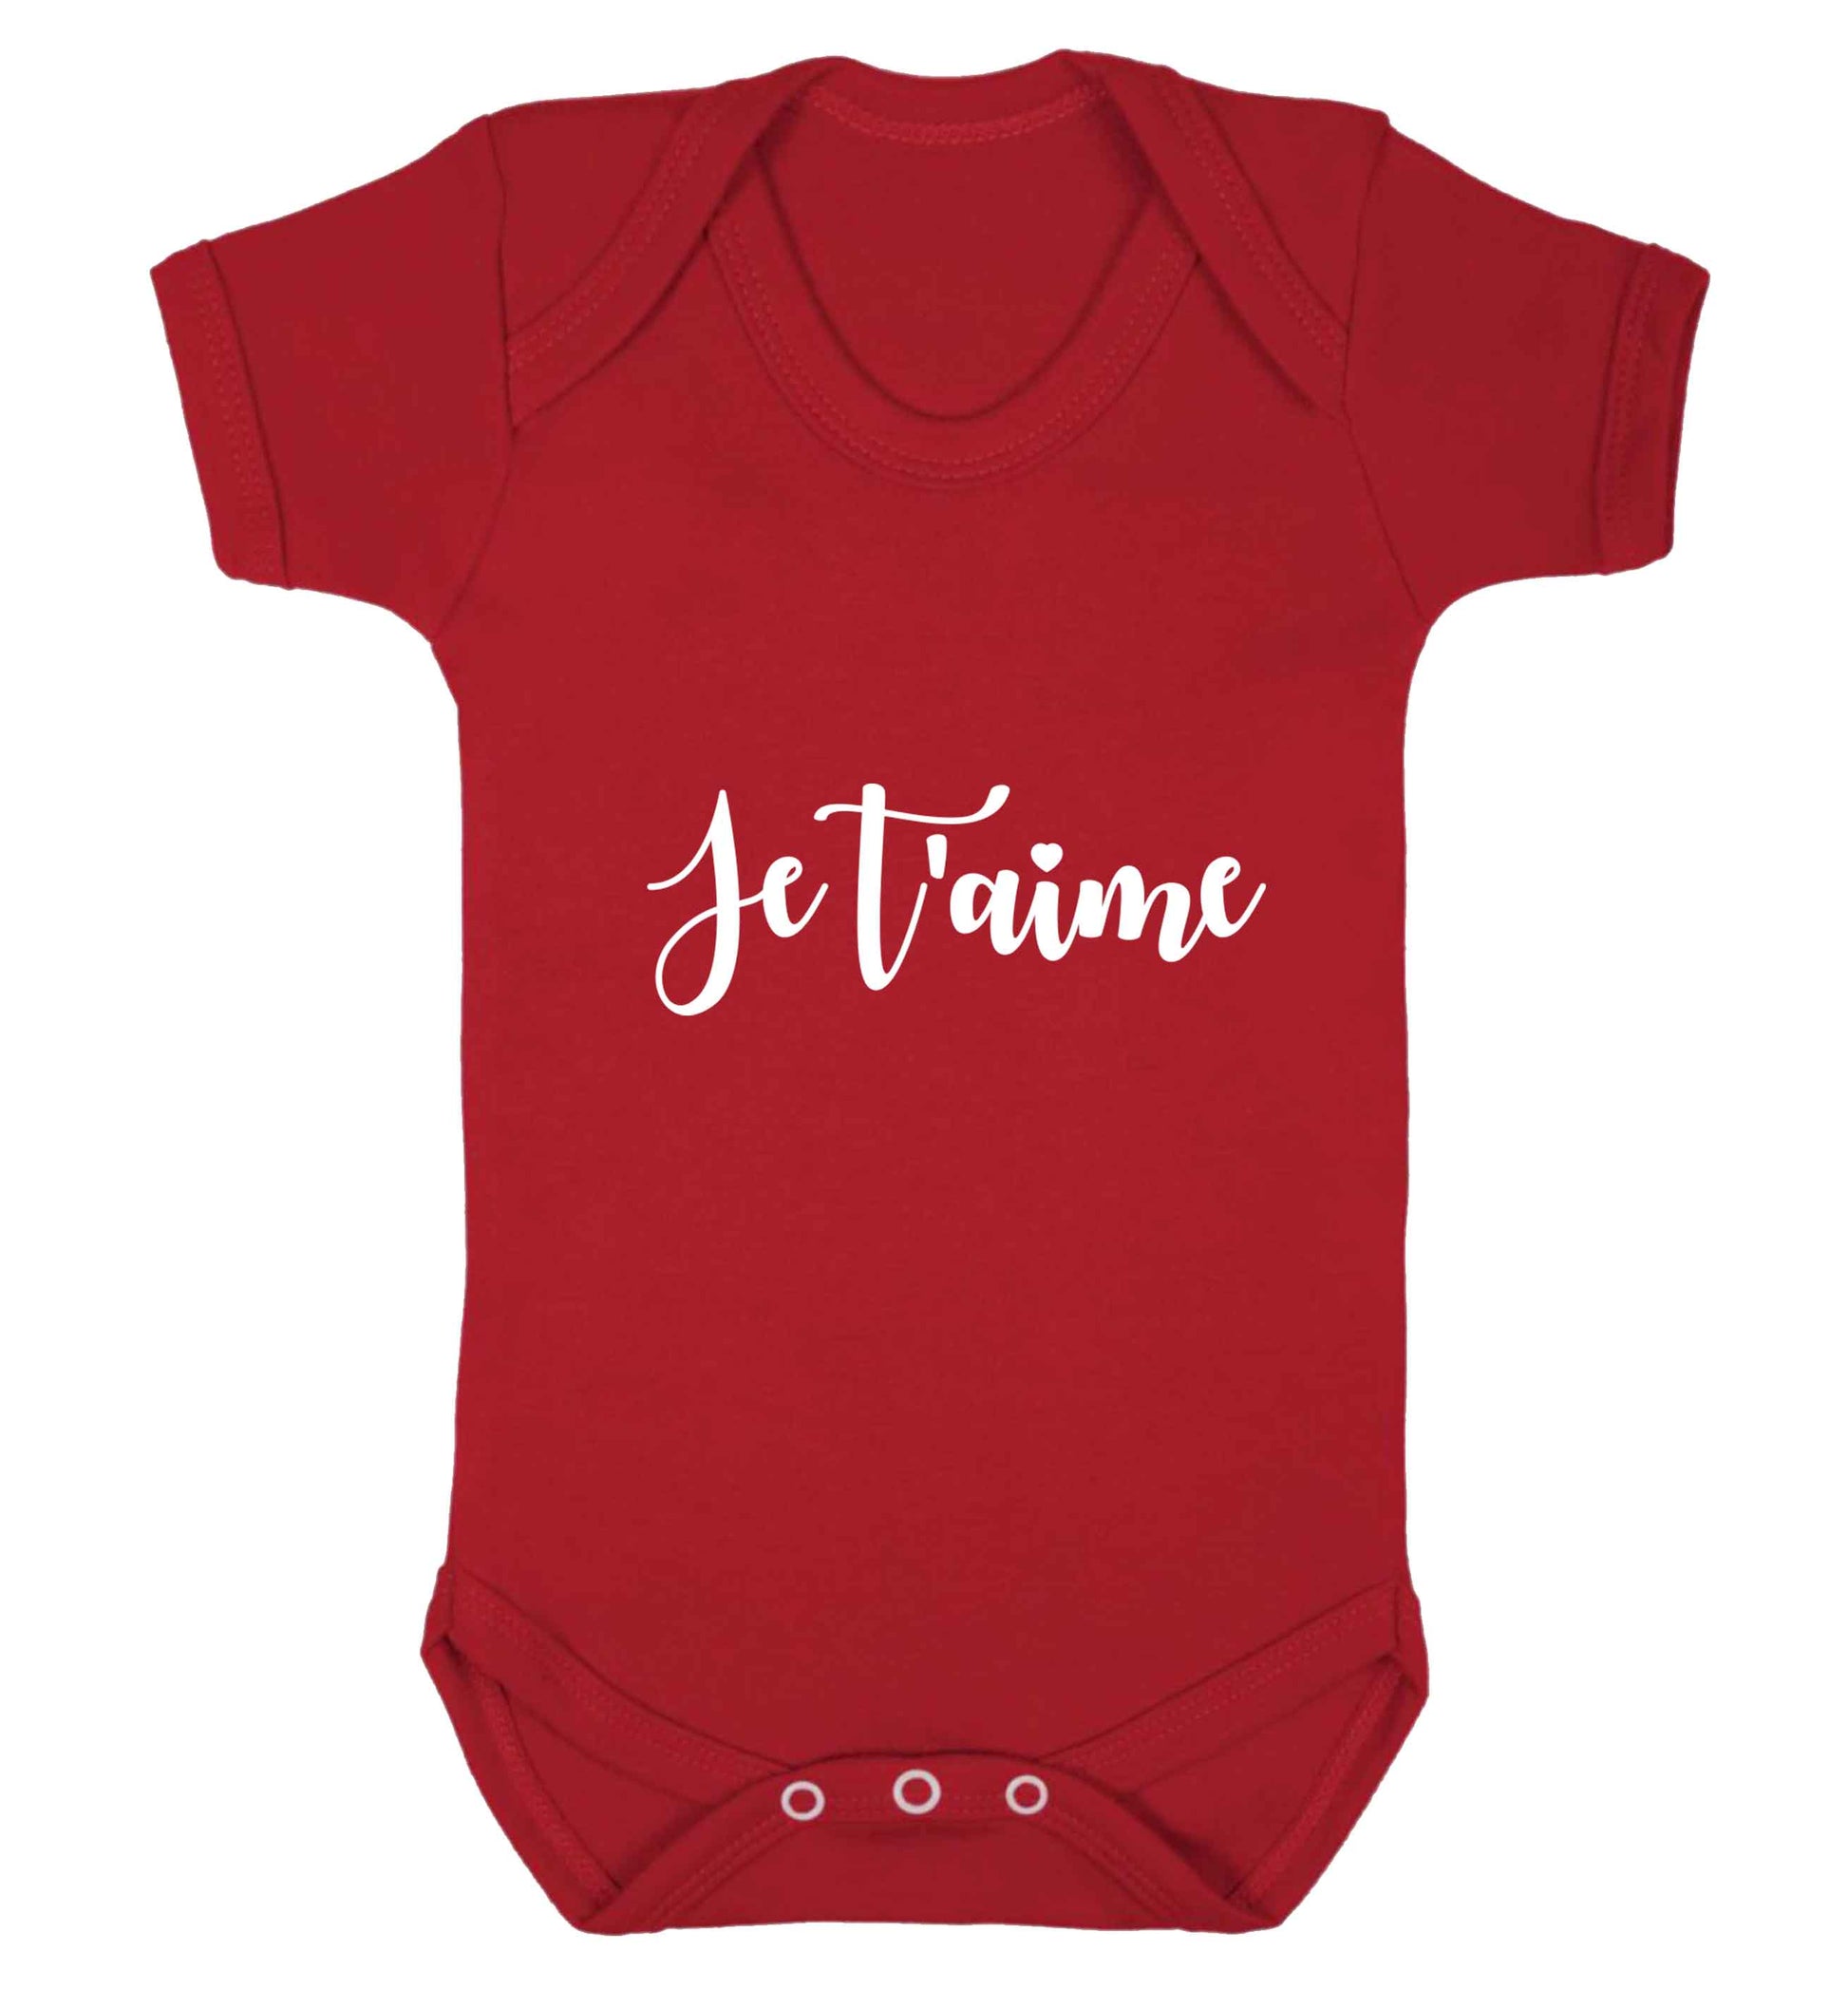 Je t'aime baby vest red 18-24 months